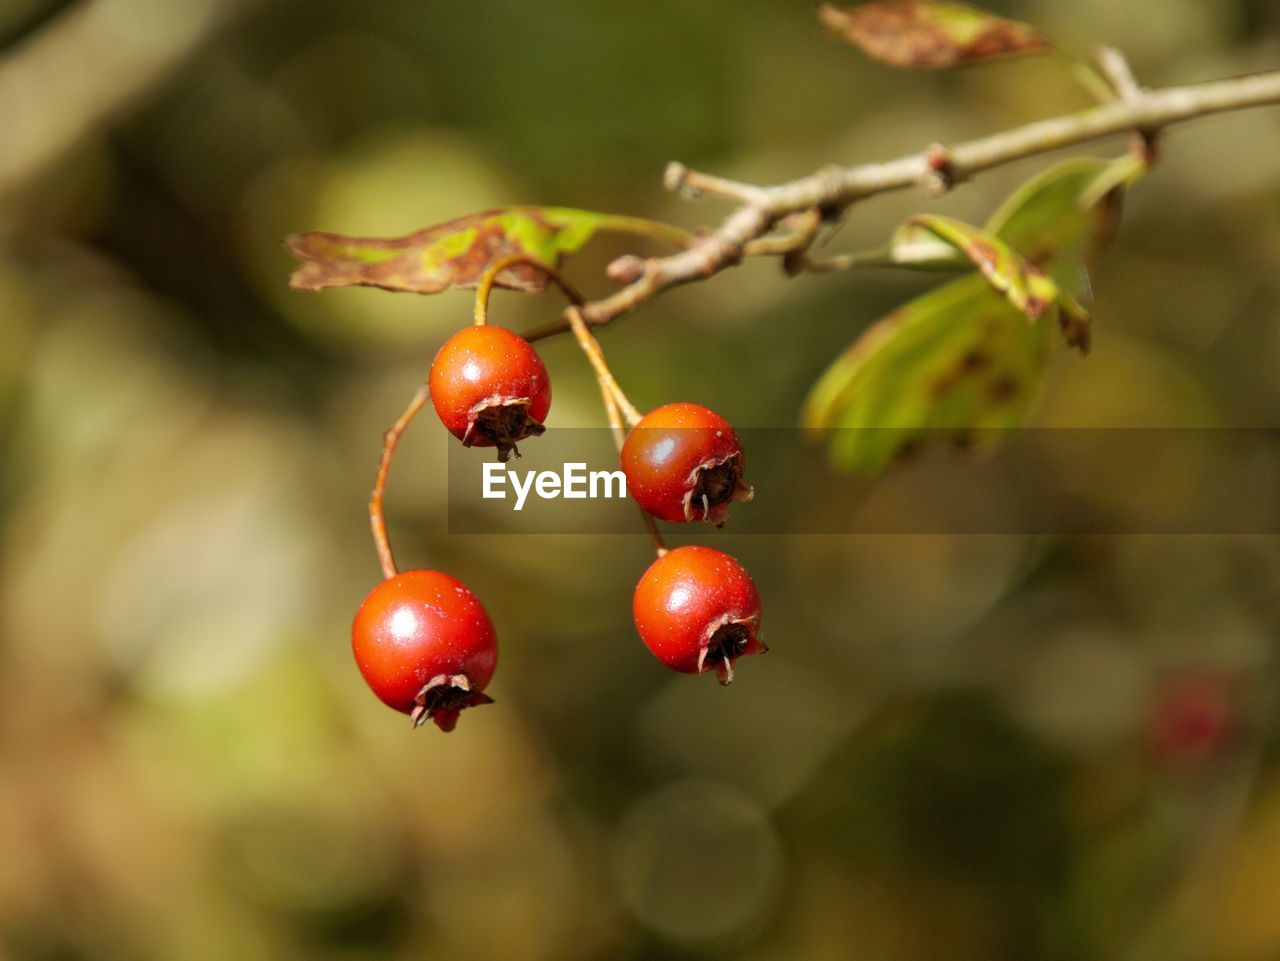 CLOSE-UP OF RED CHERRIES GROWING ON TREE